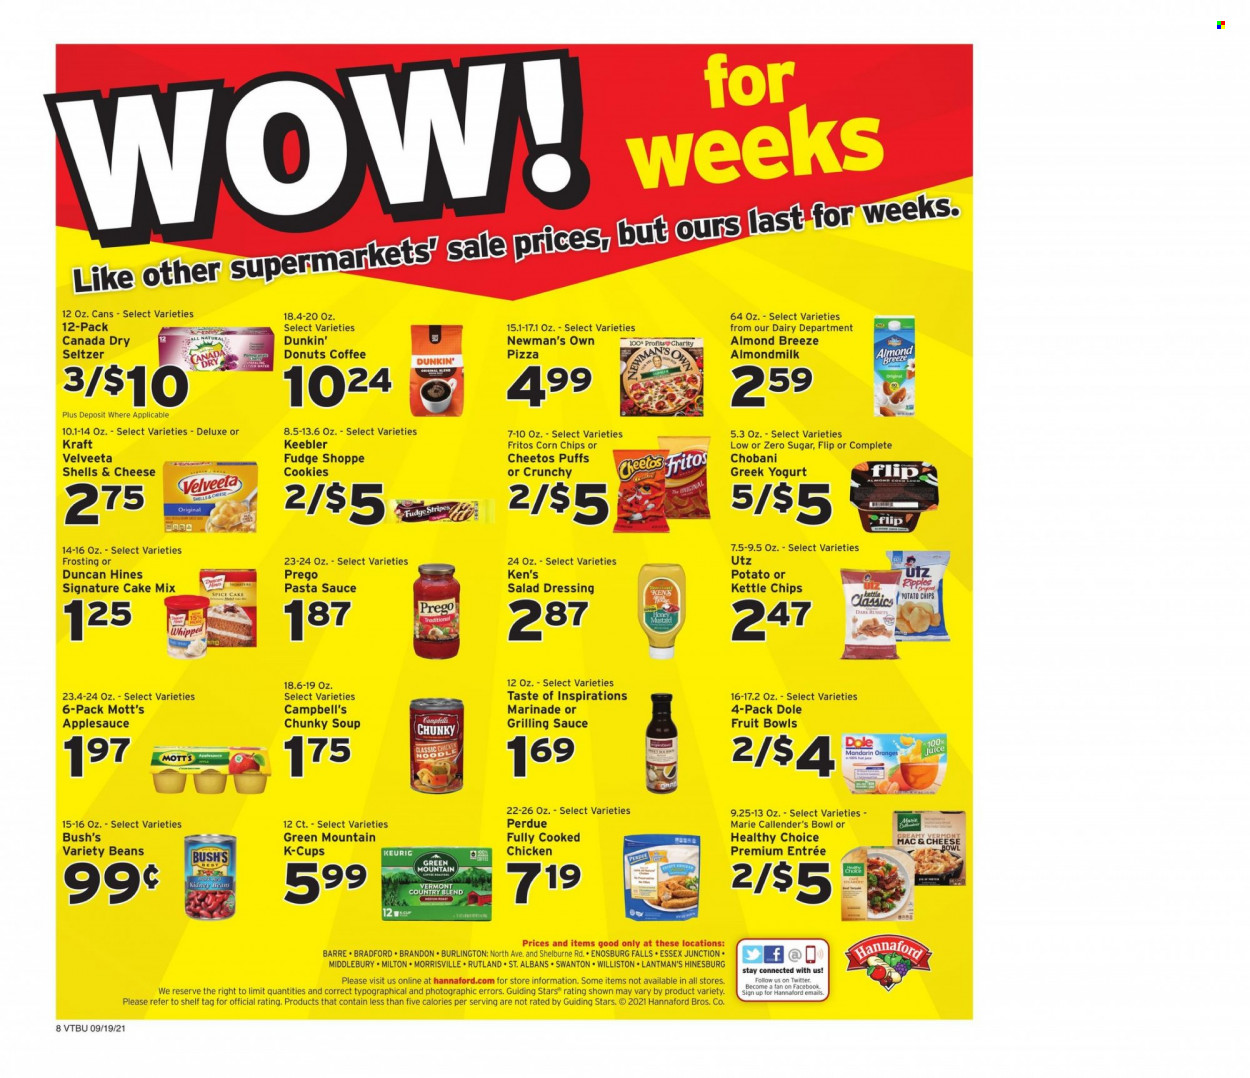 thumbnail - Hannaford Flyer - 09/19/2021 - 09/25/2021 - Sales products - puffs, Dunkin' Donuts, cake mix, Dole, mandarines, oranges, Mott's, Campbell's, pizza, pasta sauce, soup, sauce, Healthy Choice, Perdue®, Marie Callender's, Kraft®, greek yoghurt, yoghurt, Chobani, almond milk, Almond Breeze, cookies, fudge, Keebler, Fritos, potato chips, Cheetos, chips, corn chips, frosting, spice, salad dressing, dressing, marinade, apple sauce, Canada Dry, juice, seltzer water, coffee, coffee capsules, K-Cups, Keurig, Green Mountain, bowl. Page 10.